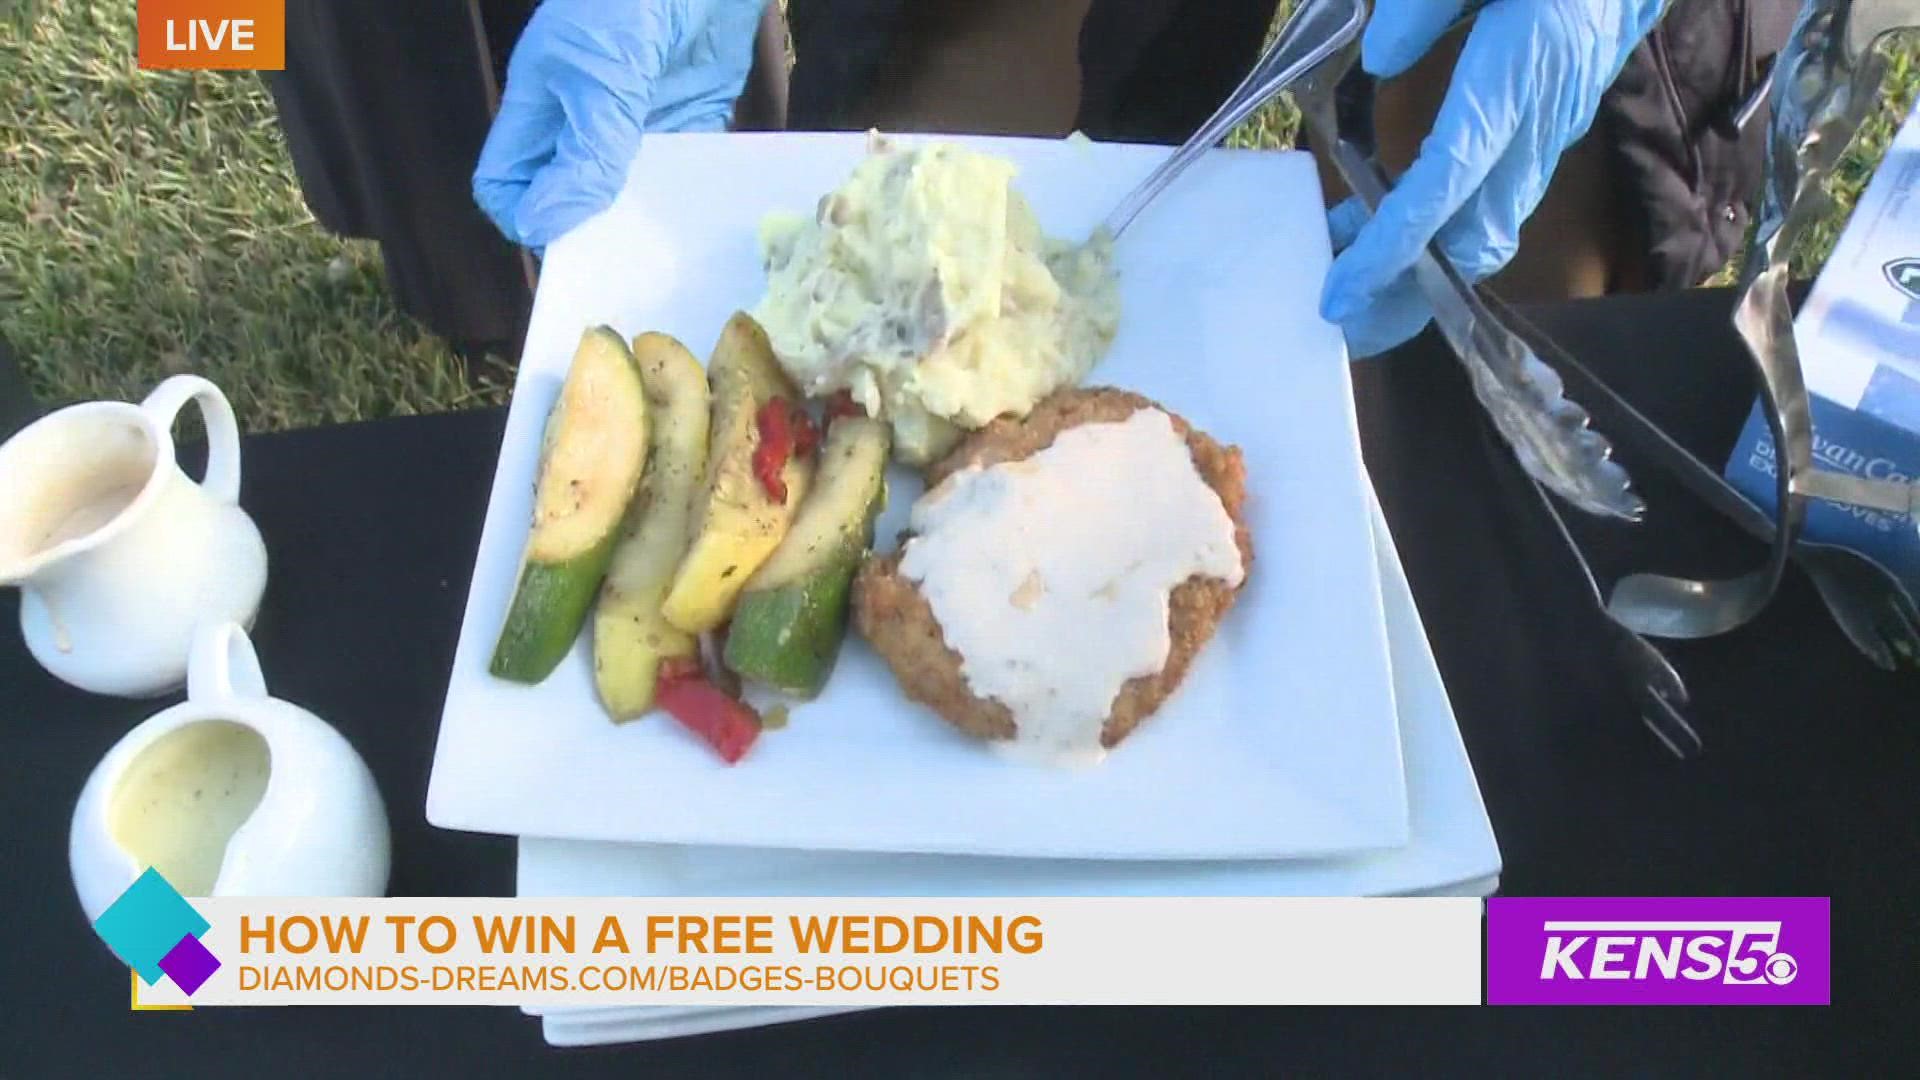 Heavenly Gourmet is giving the community an opportunity to win a free wedding